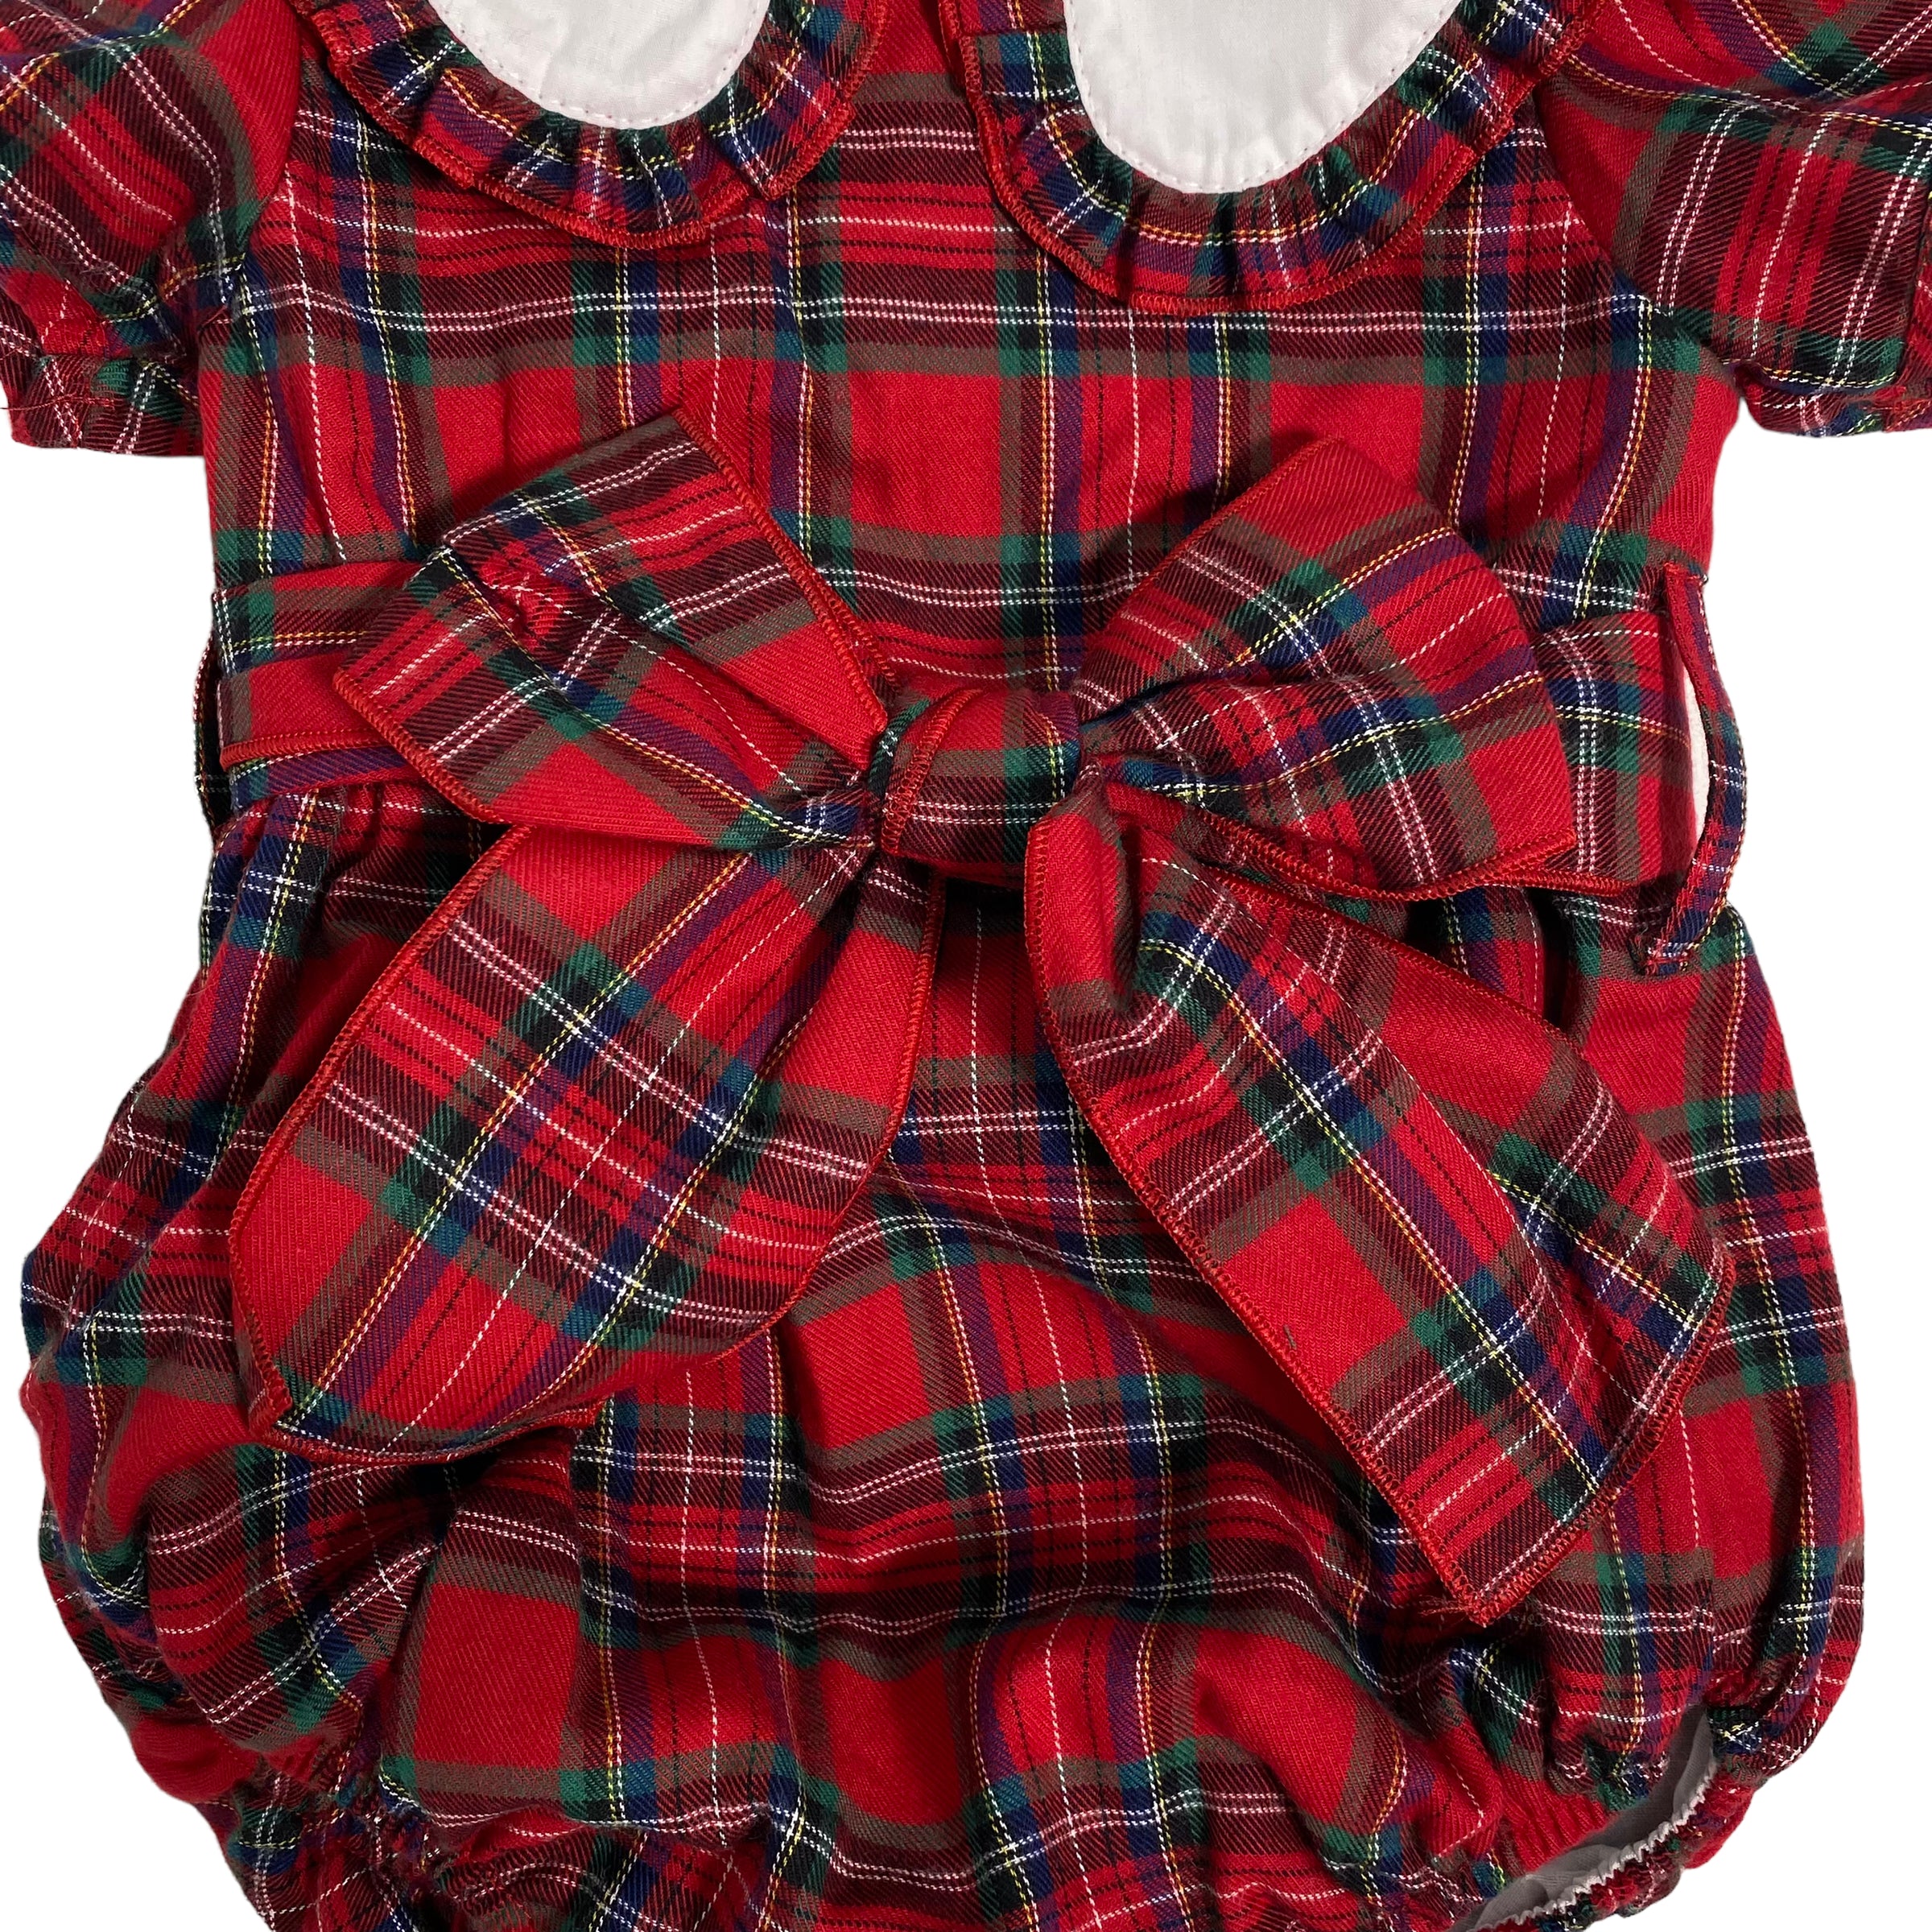 Pagliaccetto Interno Scozzese Neonata PHY CLOTHING 22706 - PHY CLOTHING - LuxuryKids